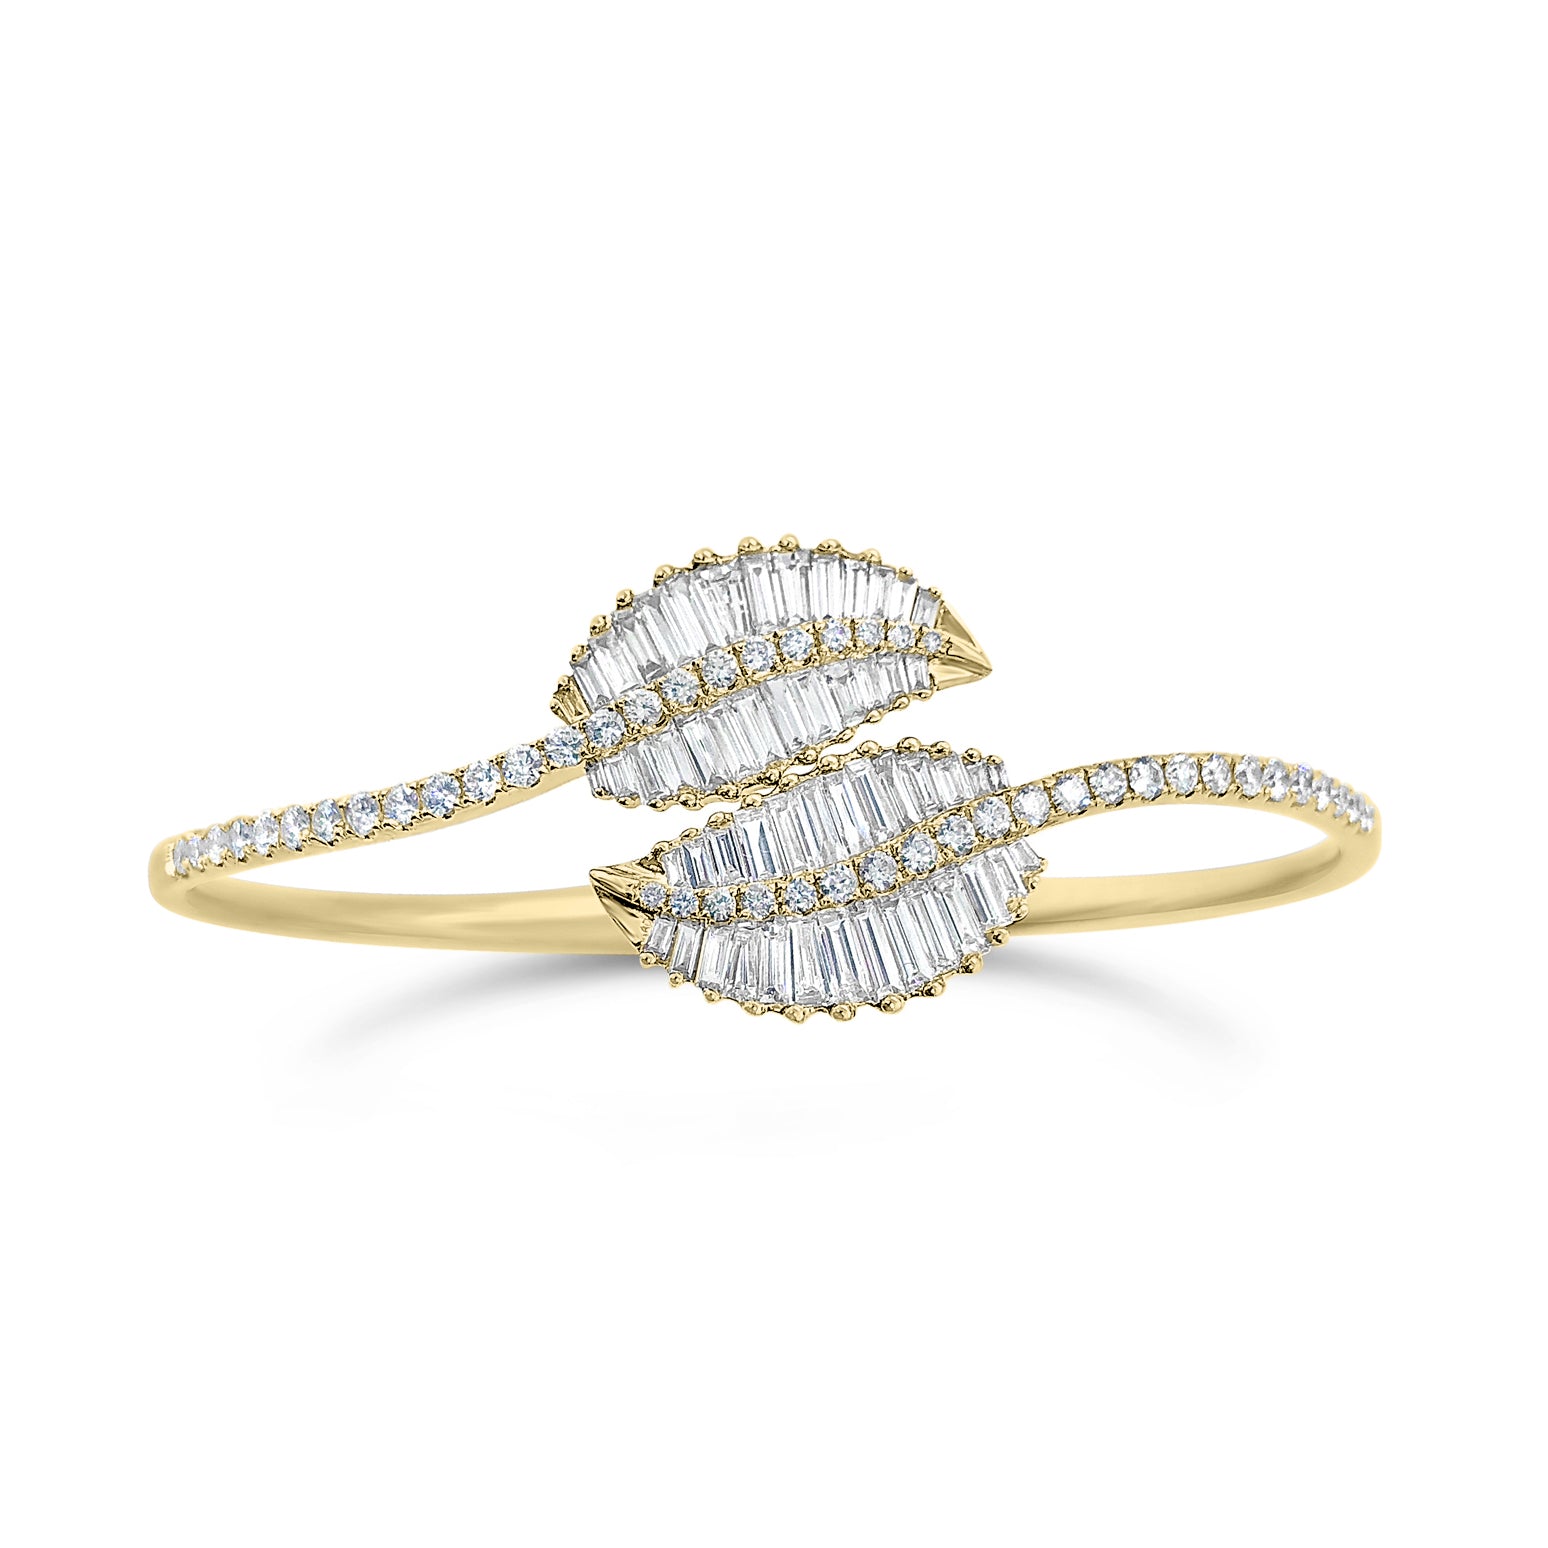 Diamond Bypass Leaf Bangle  - 14kt yellow gold 12.60 grams  - 56 straight baguettes weighing 1.50 ct   - 46 round brilliant cut diamonds weighing 0.83 ct 